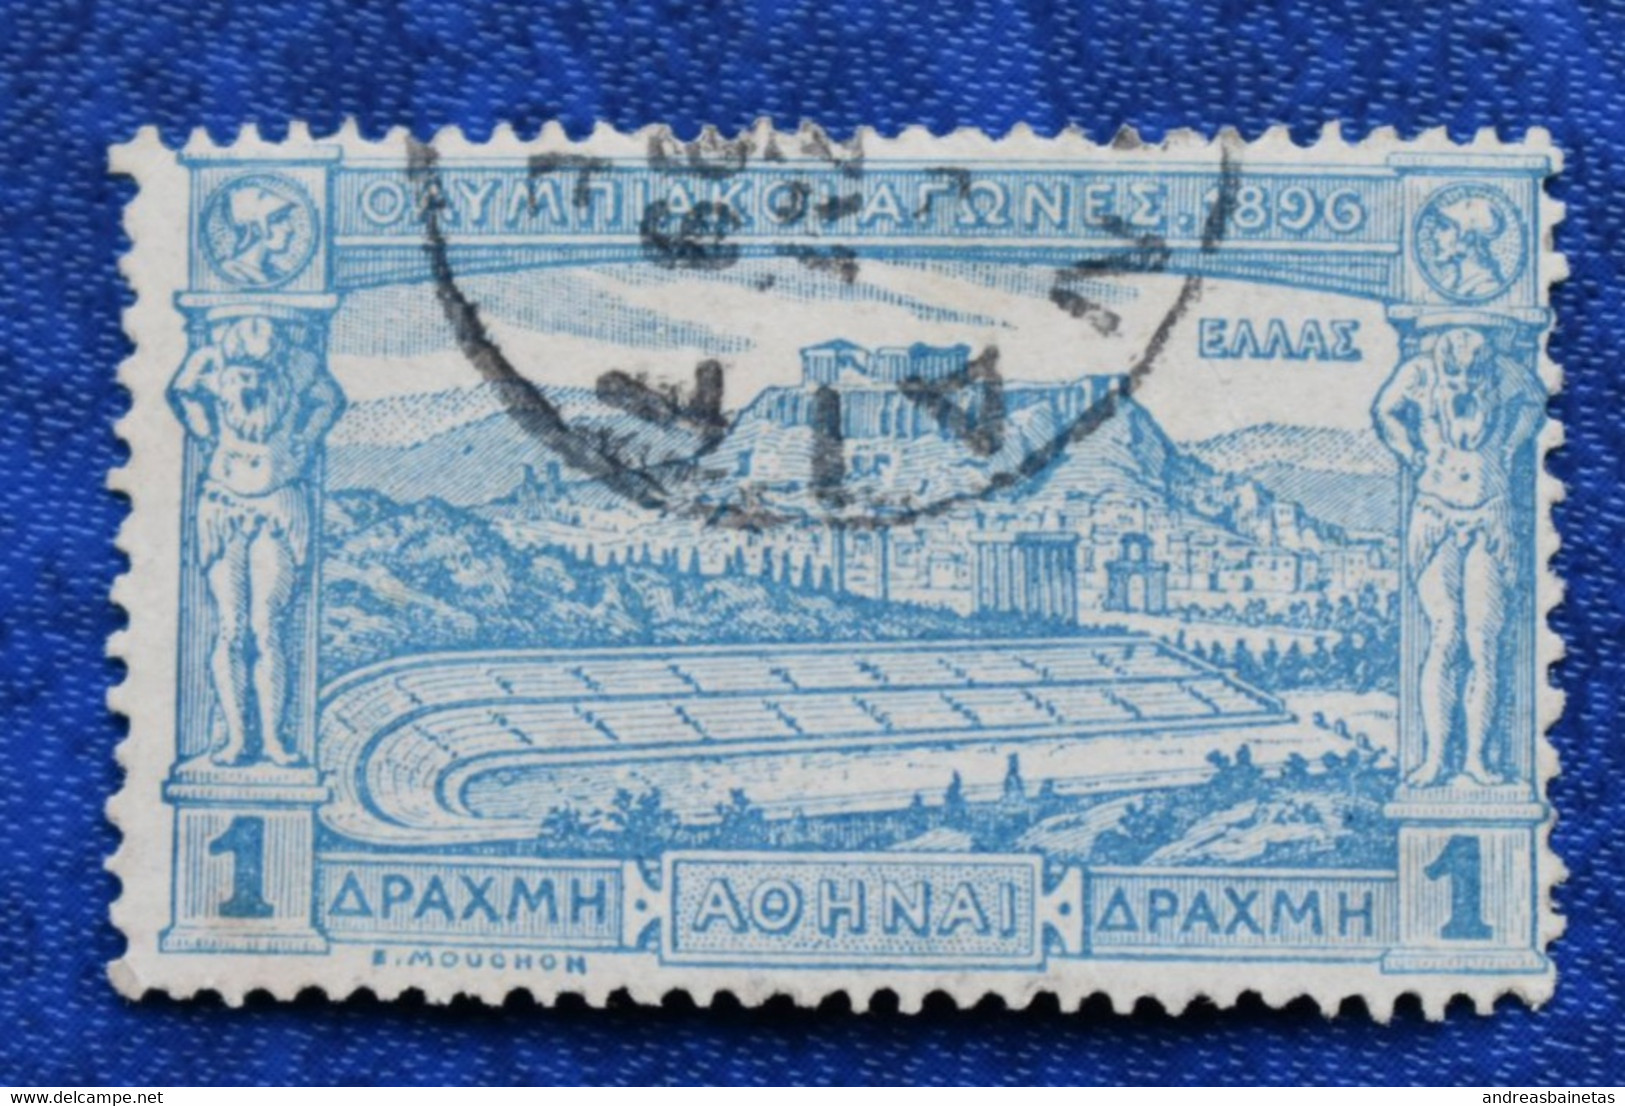 Stamps GREECE 1896 The 1st Modern Olympic Games 1 ₯ - Greek Drachma Used - Gebraucht